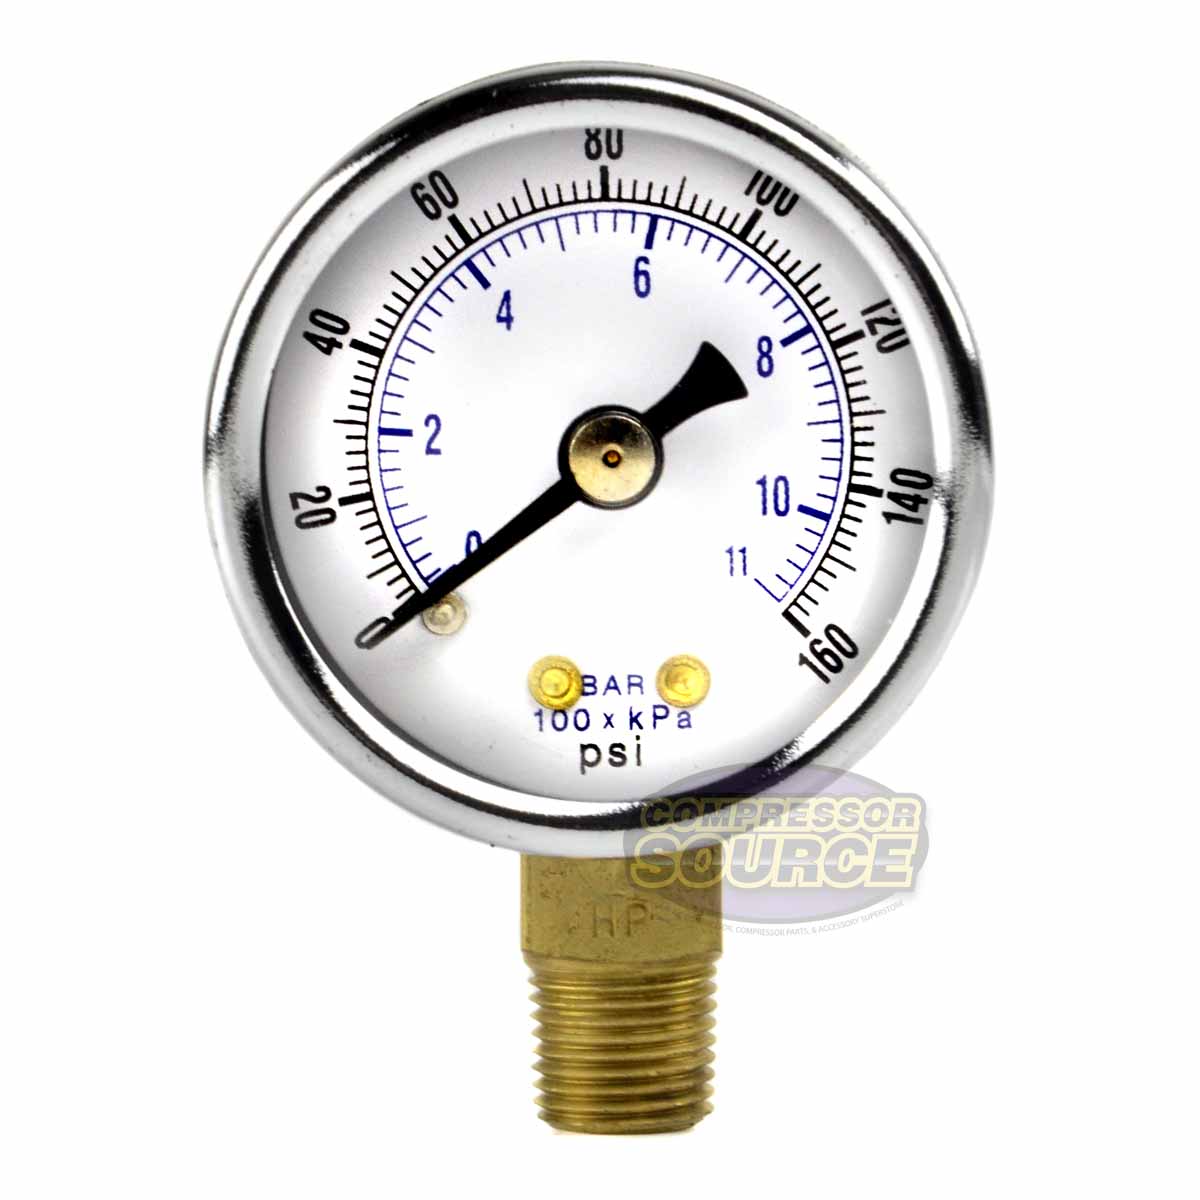 1/8" NPT 0-160 PSI Air Pressure Gauge Lower Side Mount with 1.5" Face